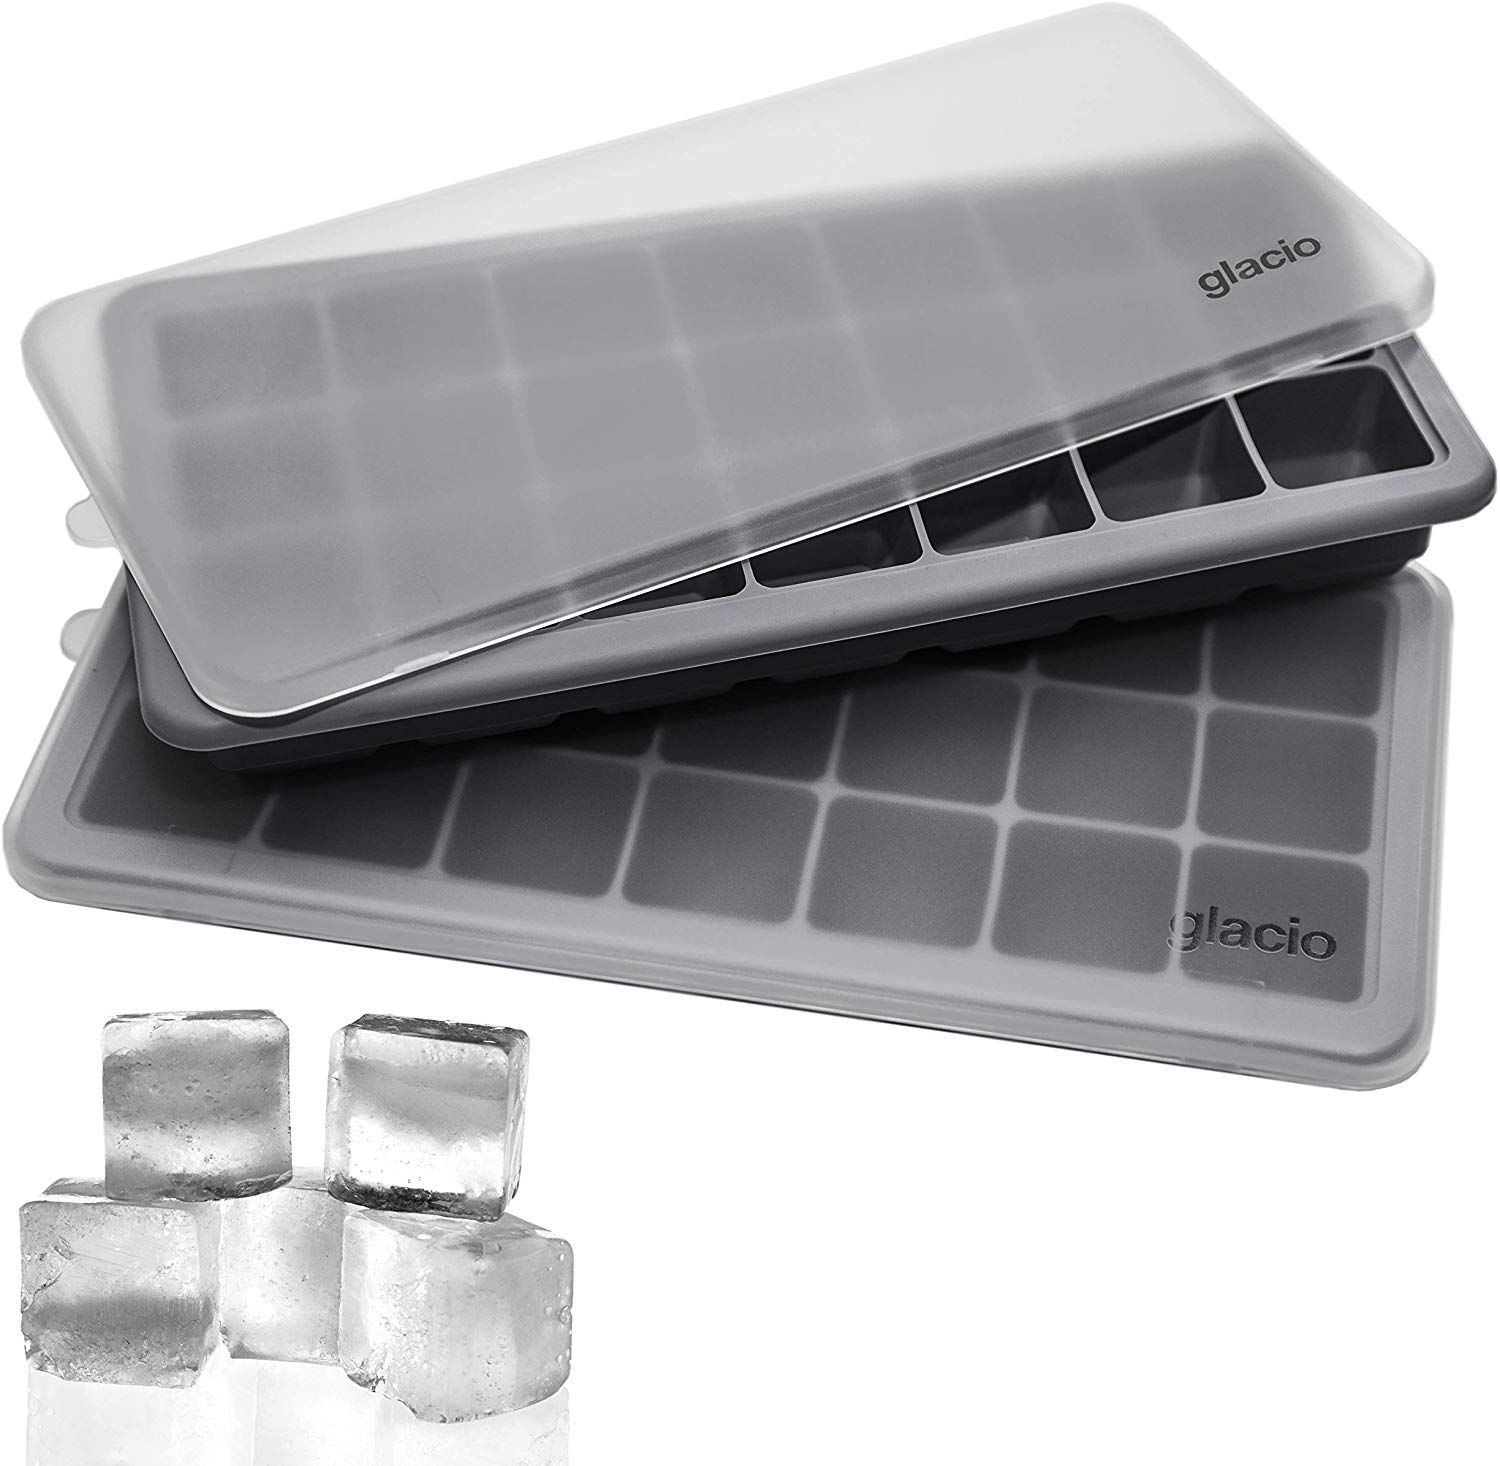 https://www.dontwasteyourmoney.com/wp-content/uploads/2020/02/glacio-silicone-ice-cube-trays-with-lids-42-cube-ice-cube-tray.jpg